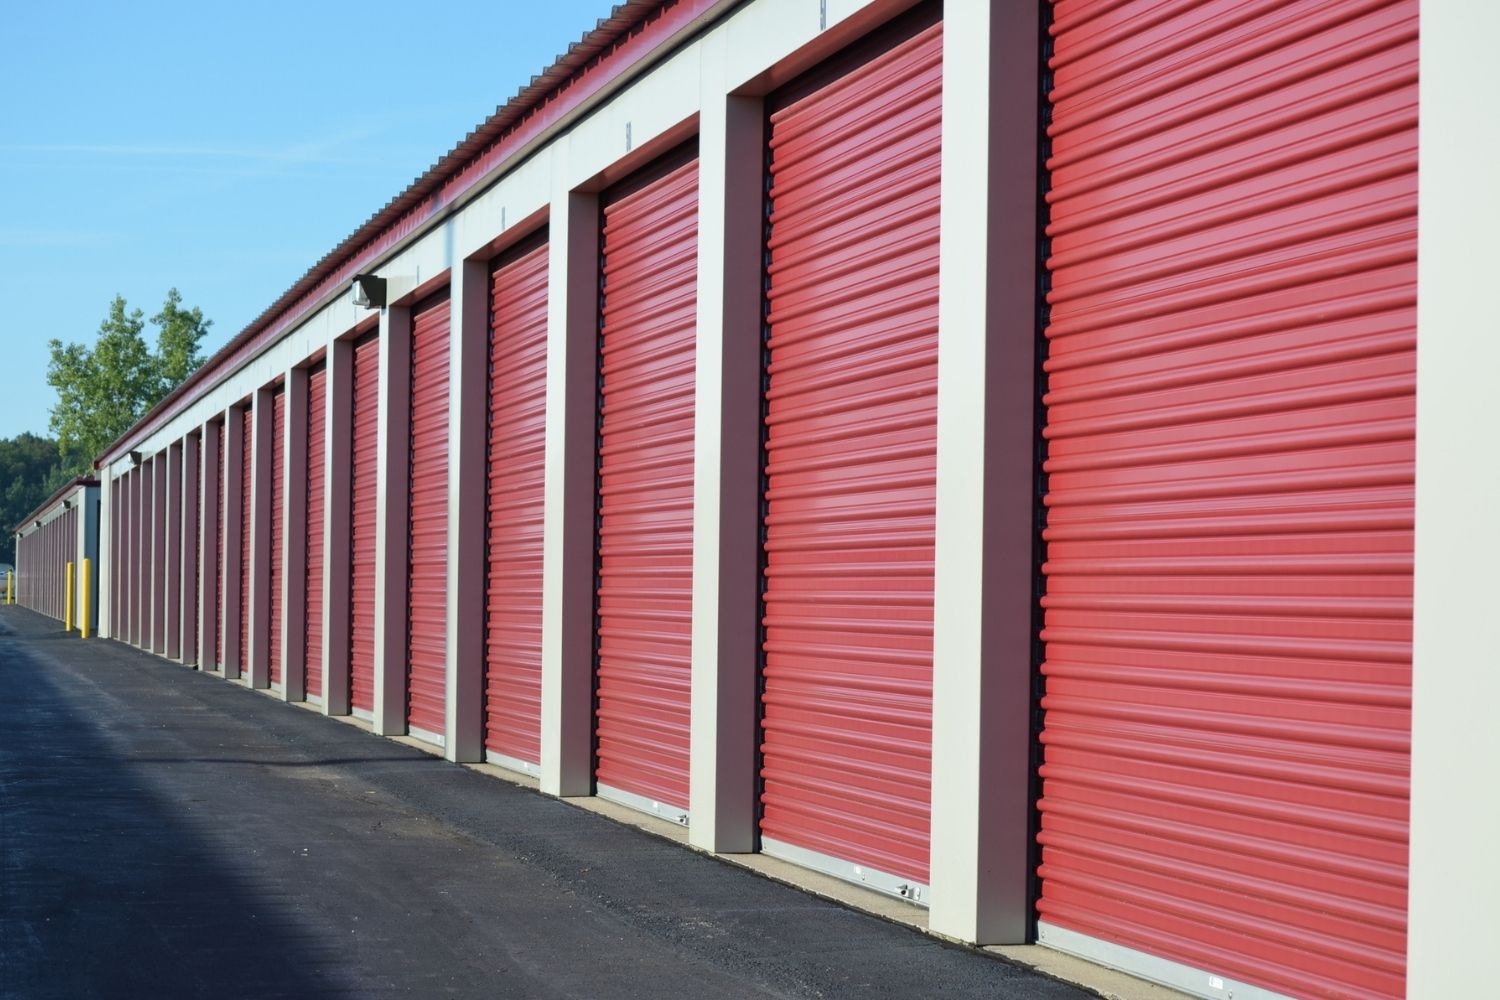 Does Renters Insurance Cover Storage Units